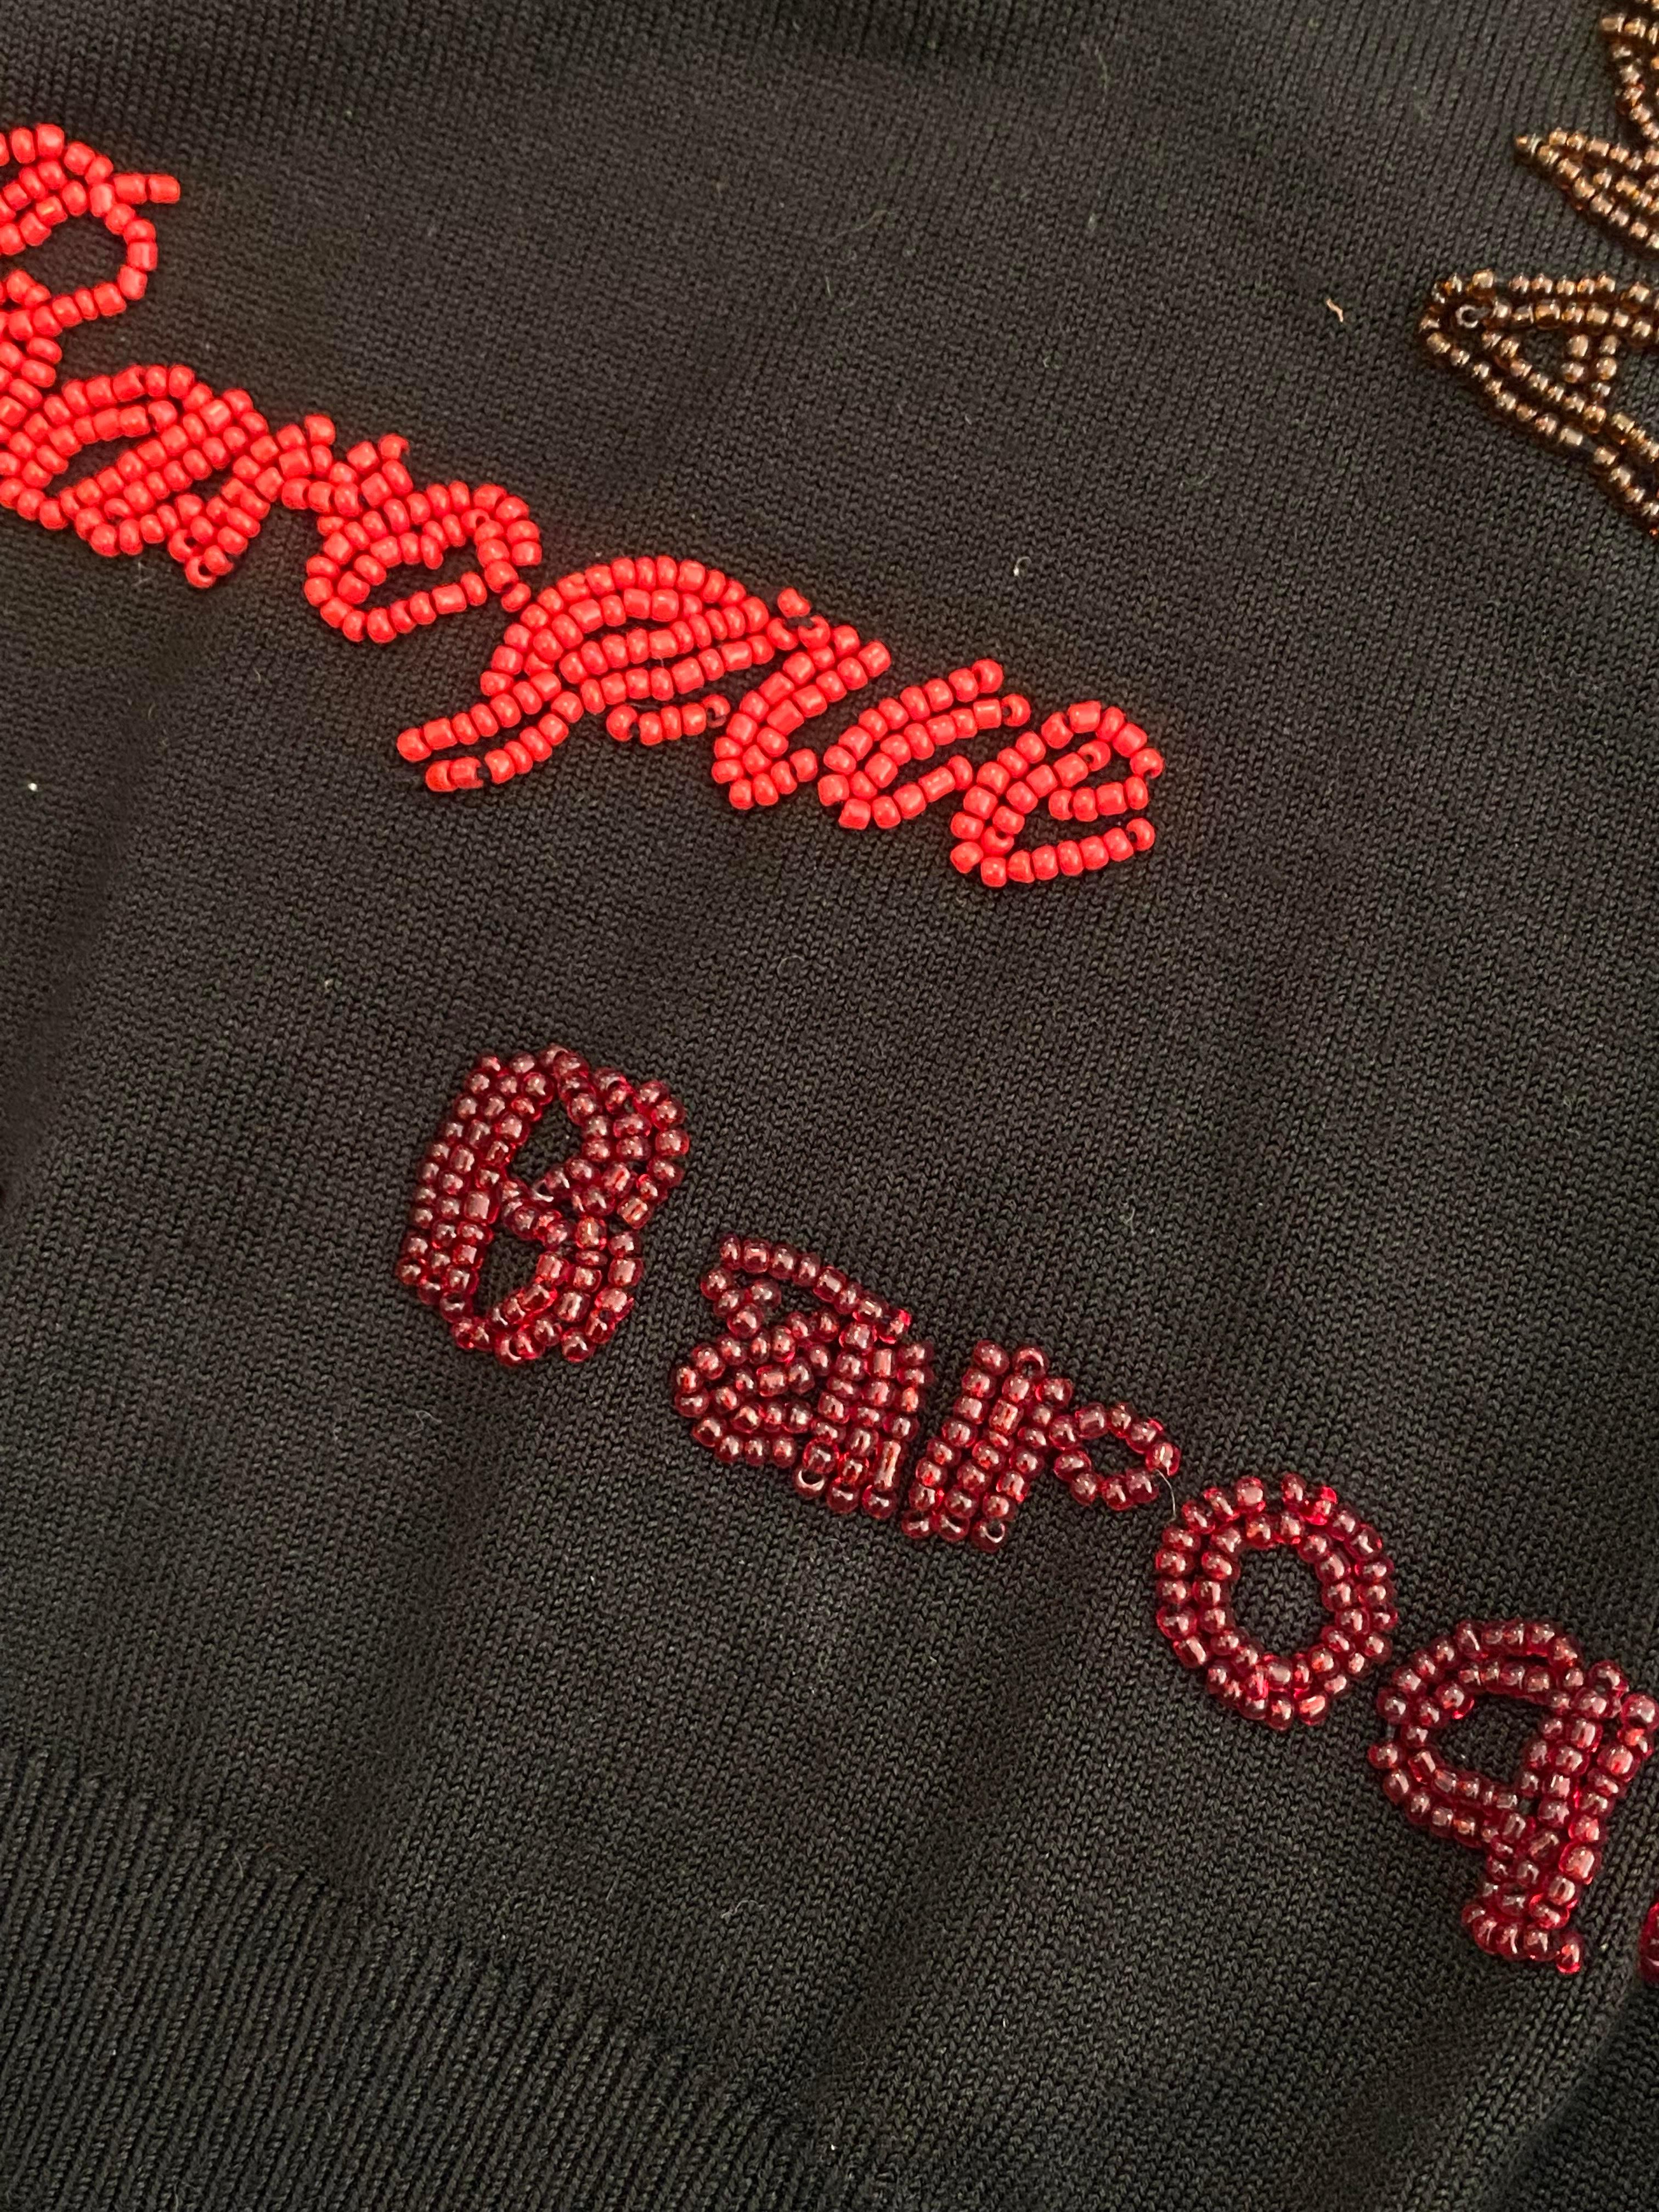 Beaded Silk Moschino Jeans Top For Sale 4